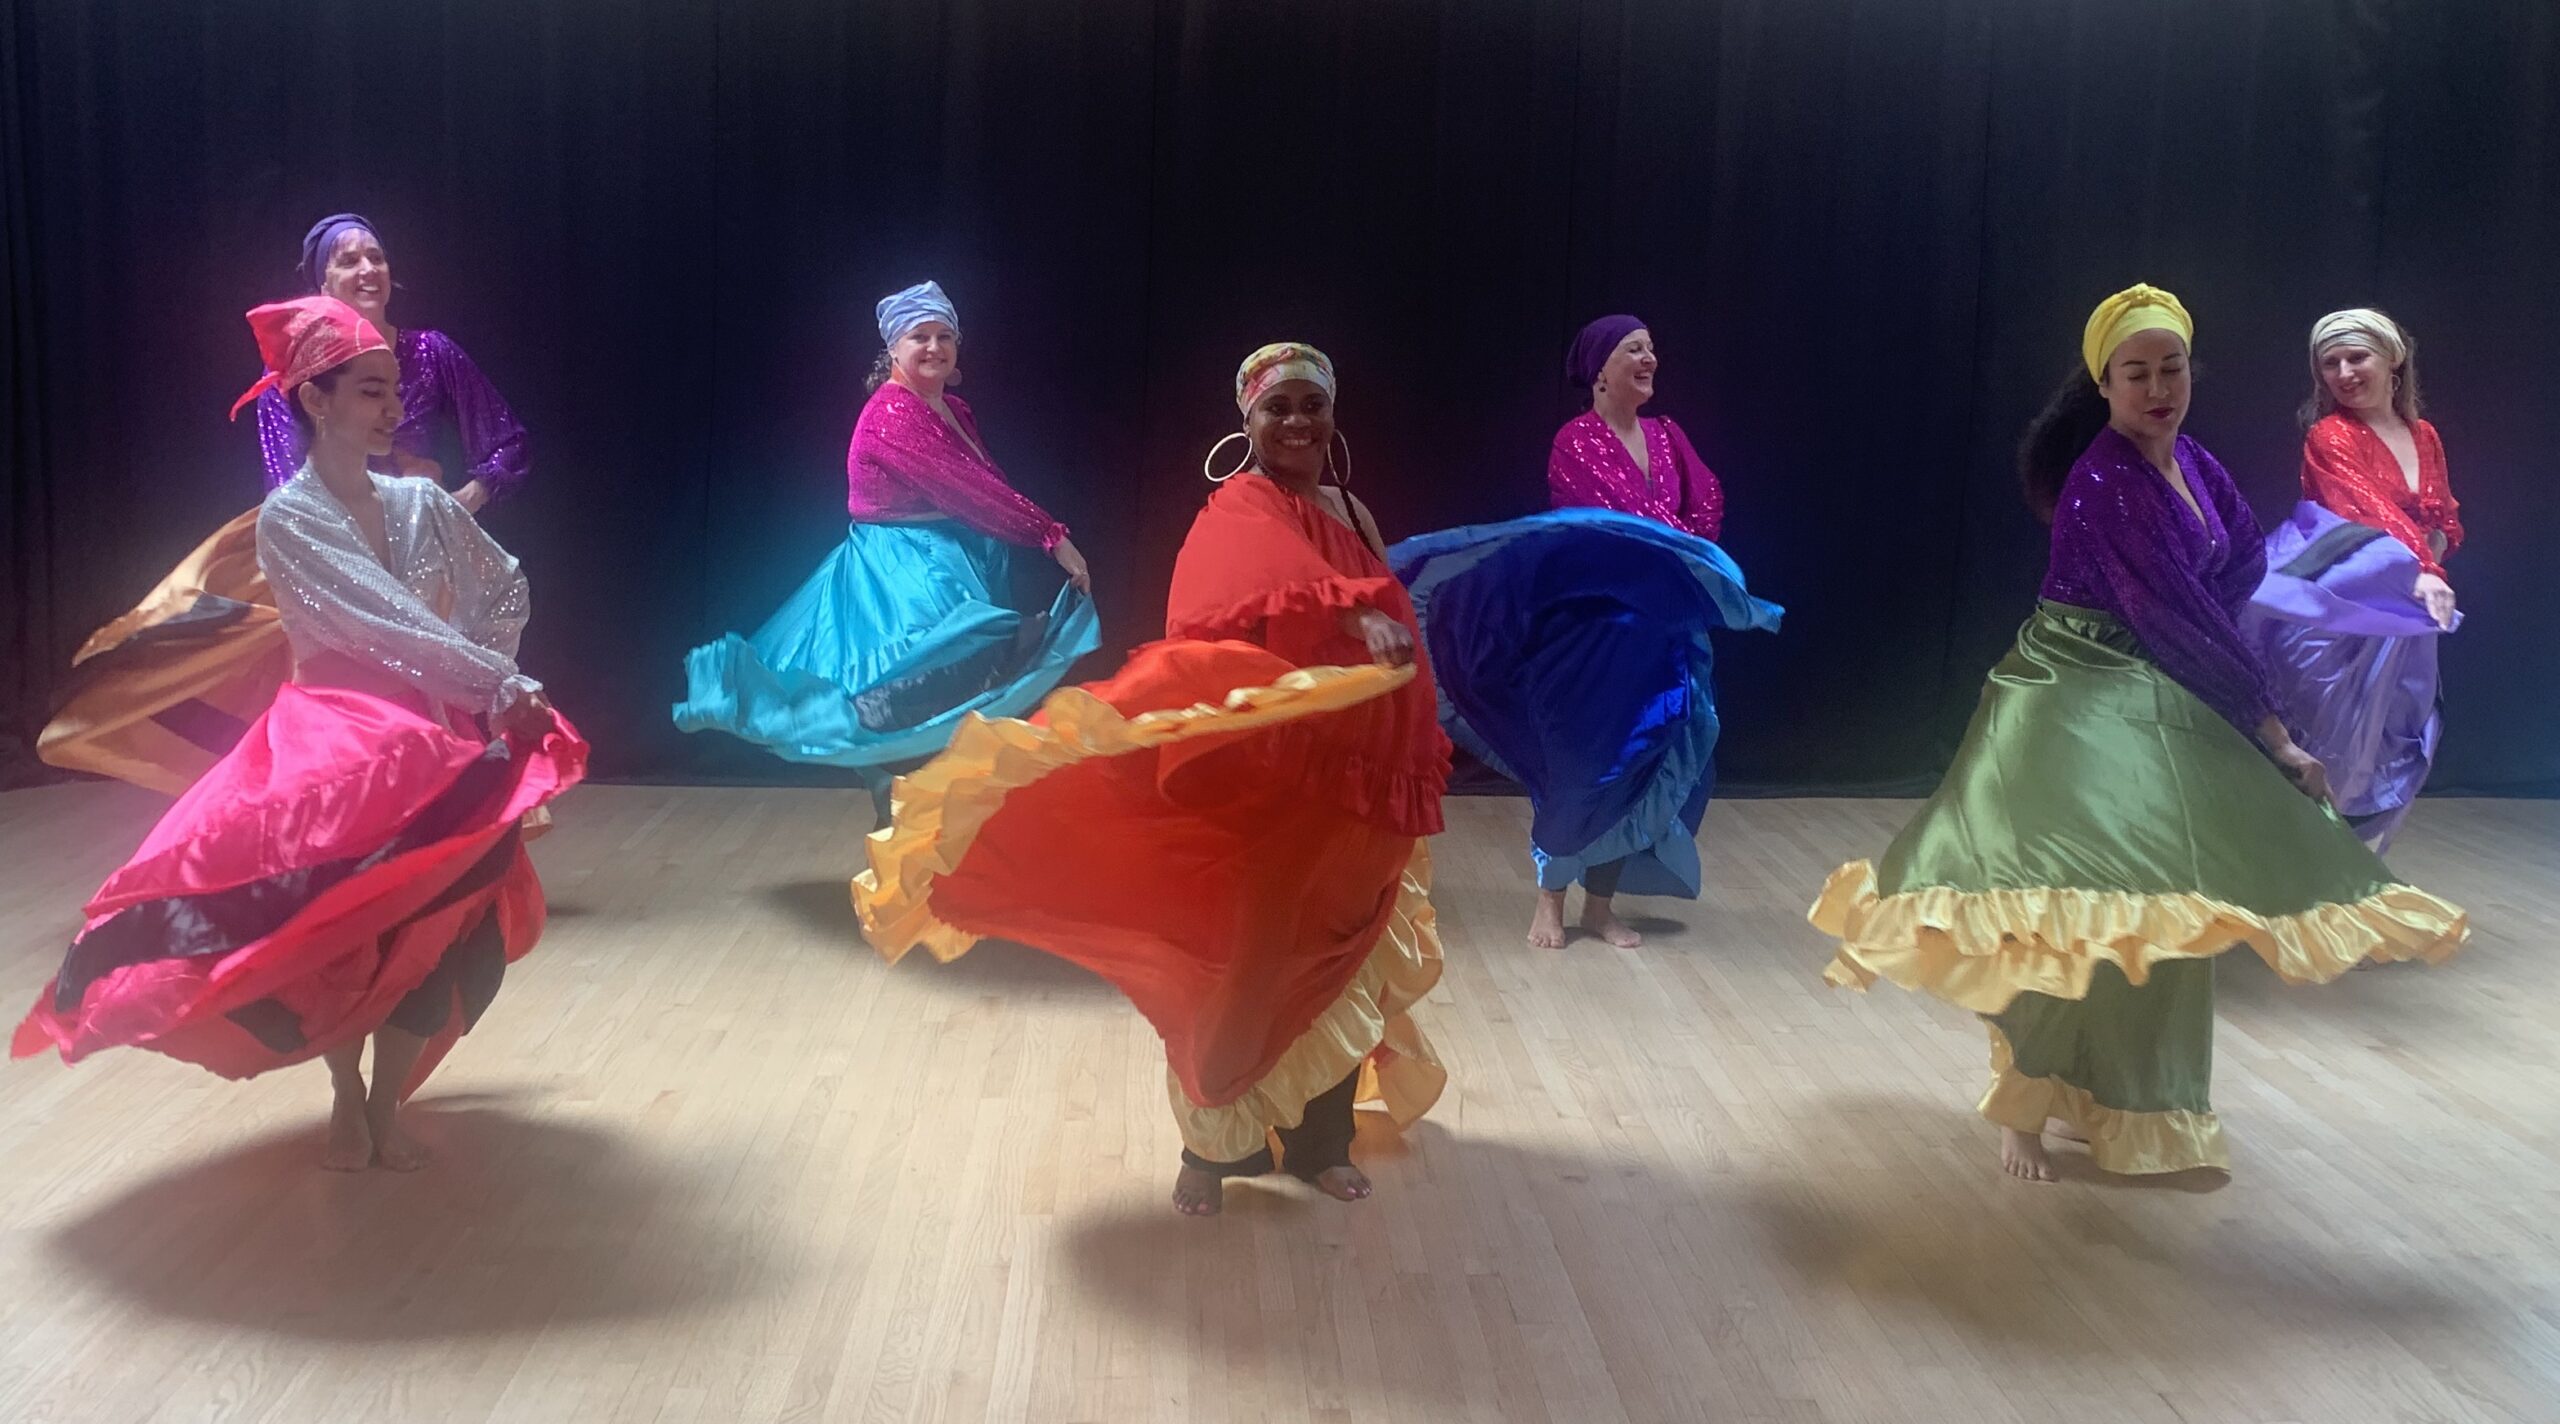 Nine dancers in brightly colored skirts and head wraps dancing smile and spin